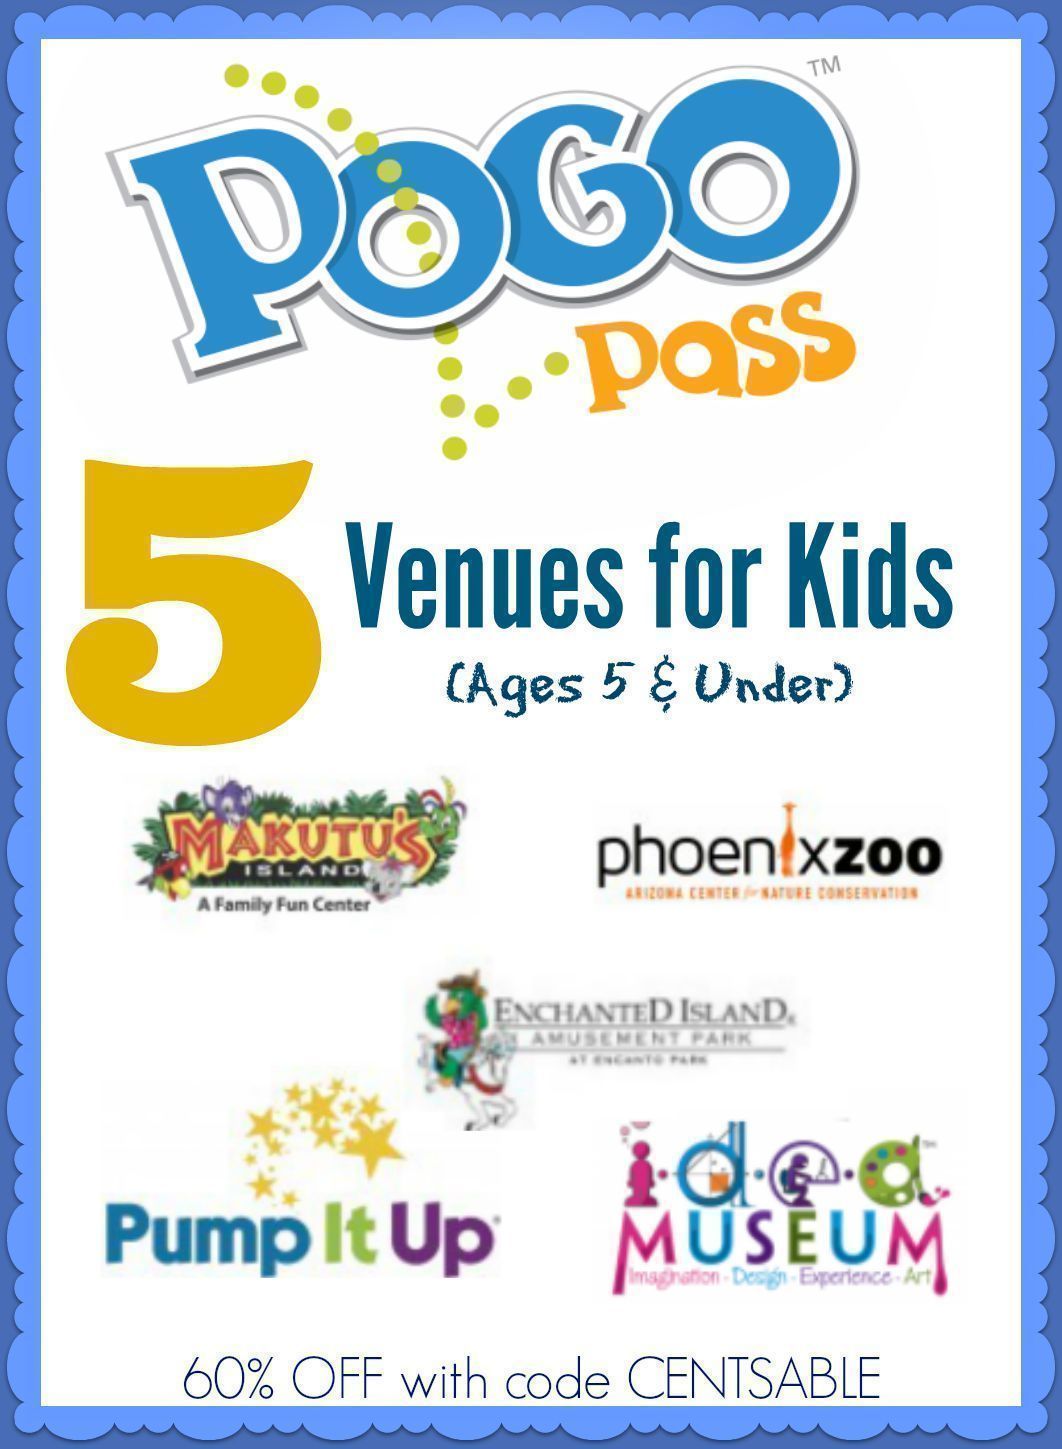 Top 5 POGO Pass Venues for Kids 5 and Under